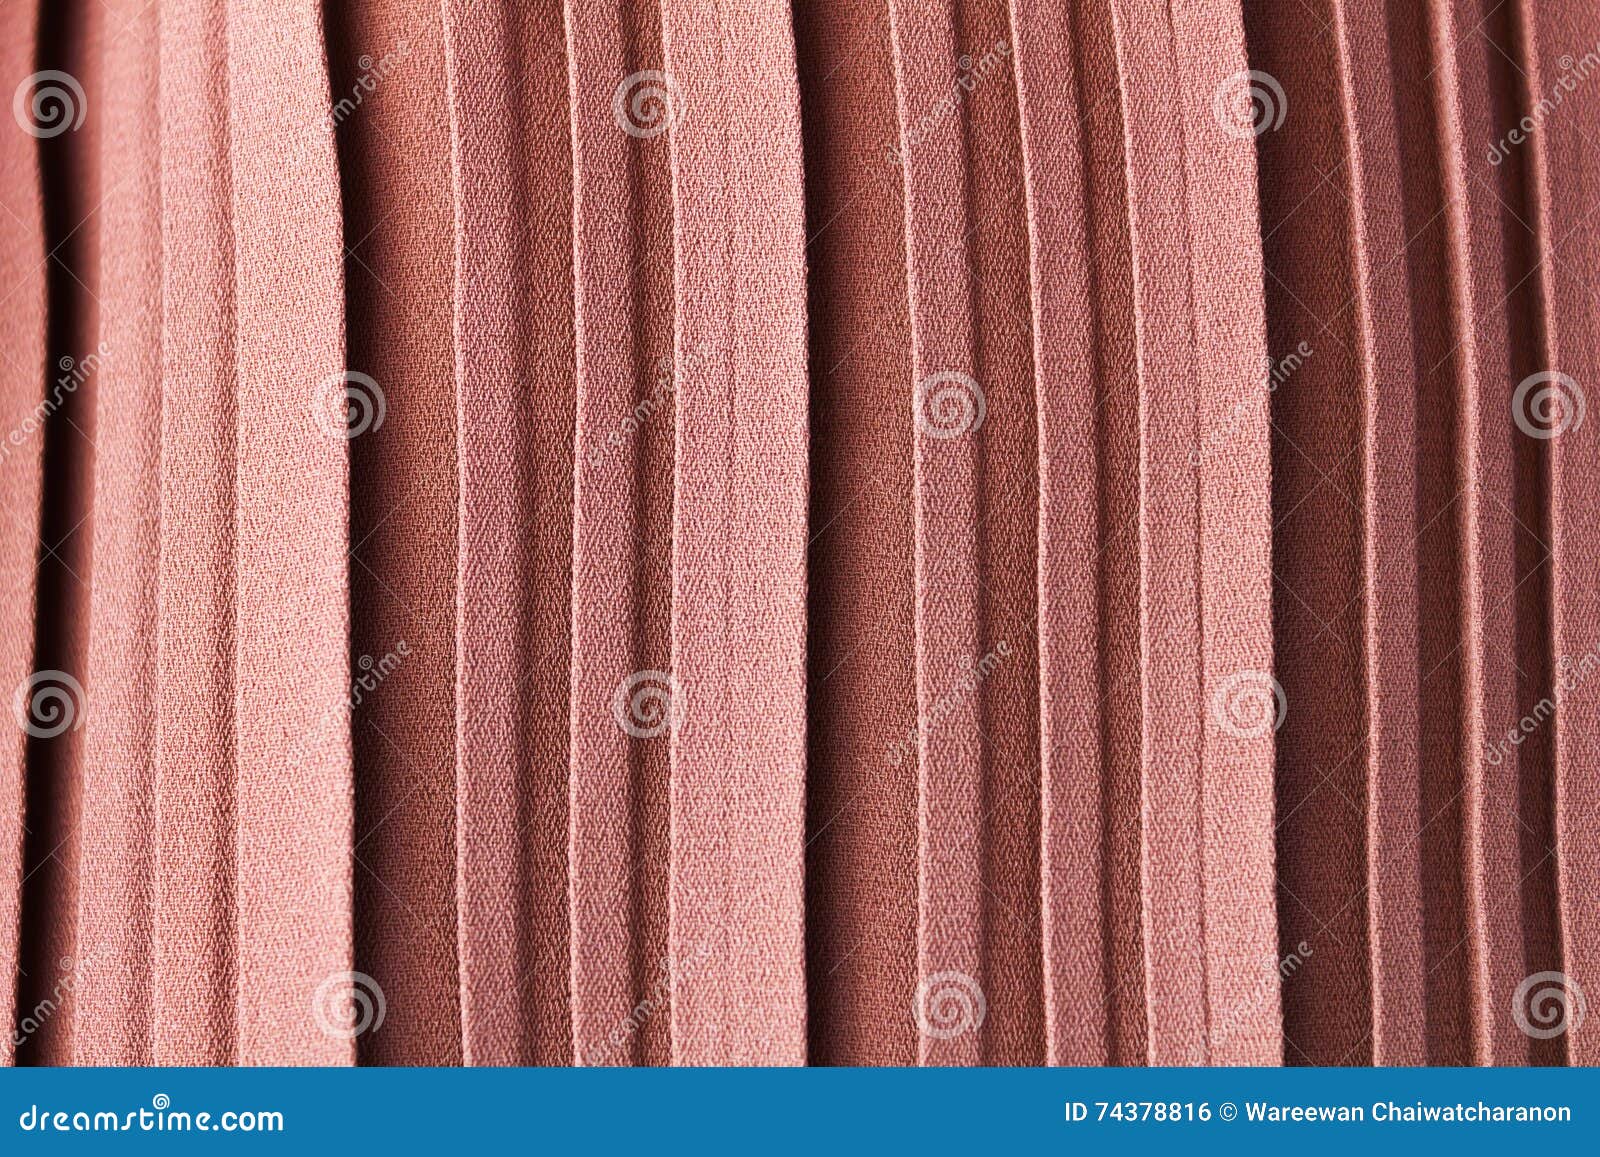 pink pastel colour abstract texture background of pleat or gather a fabric in folds cloth